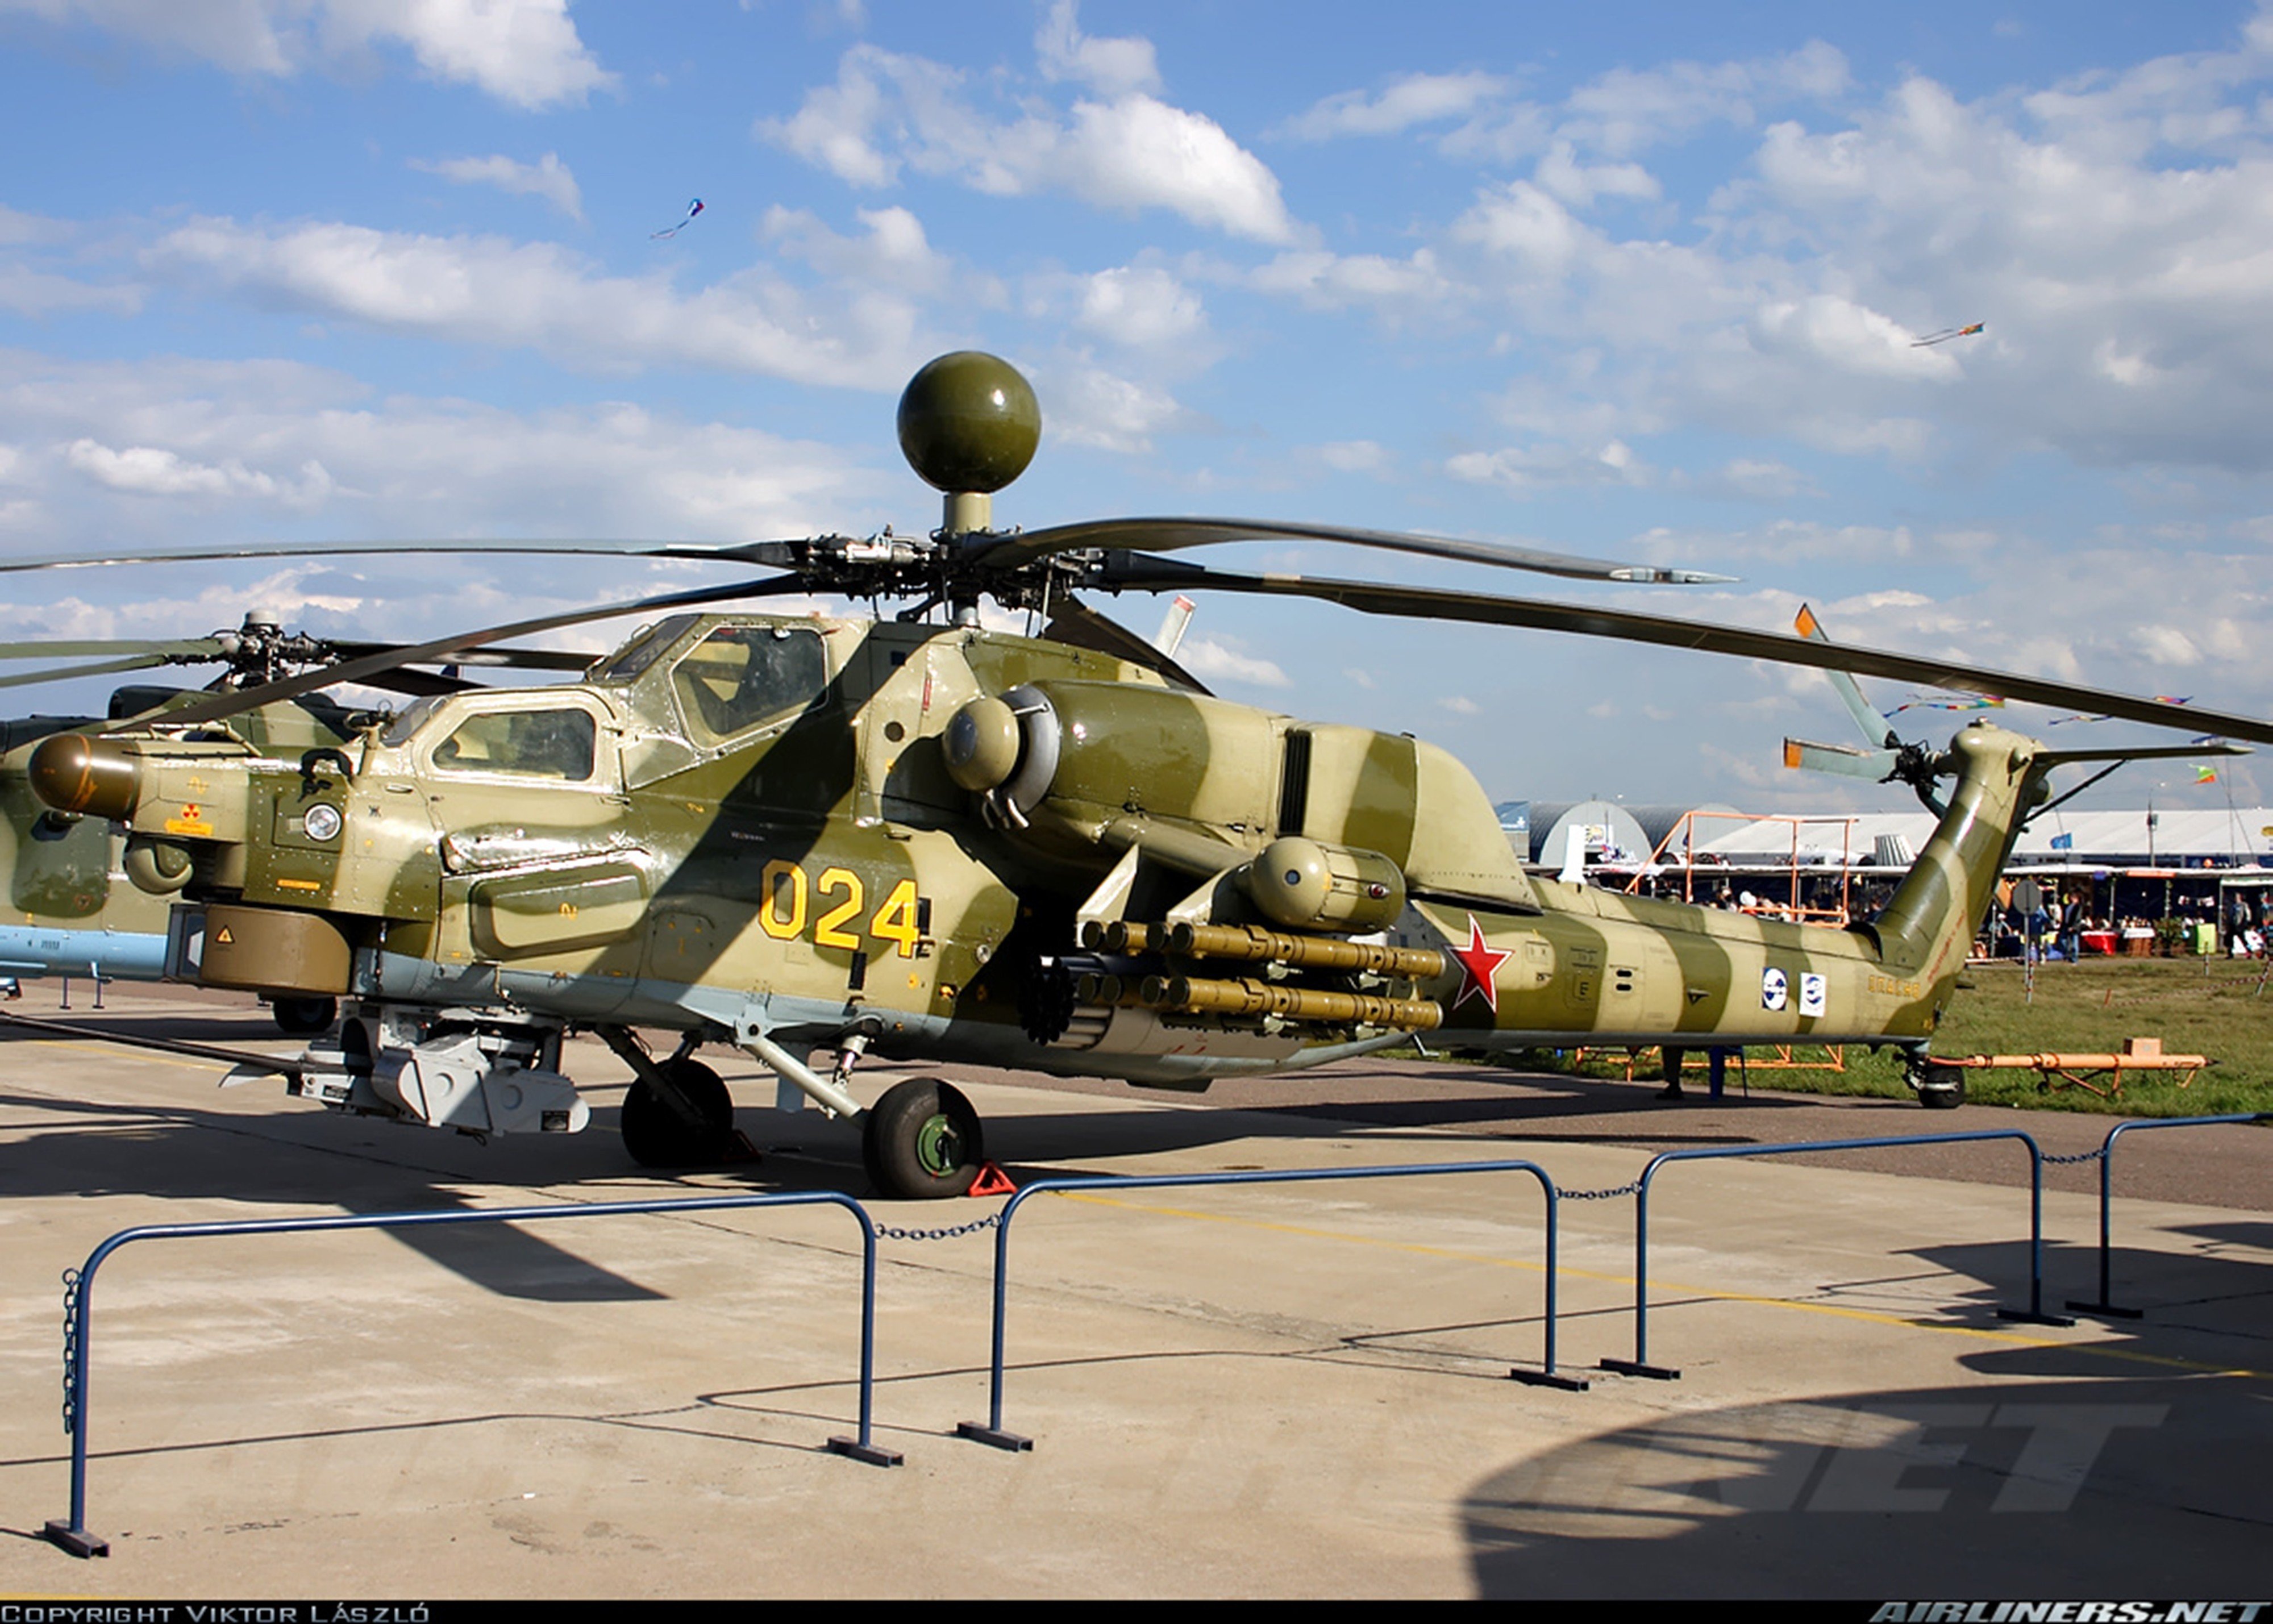 russian, Red, Star, Russia, Helicopter, Aircraft, Vehicle, Military, Army, Attack, Mil mi Wallpaper